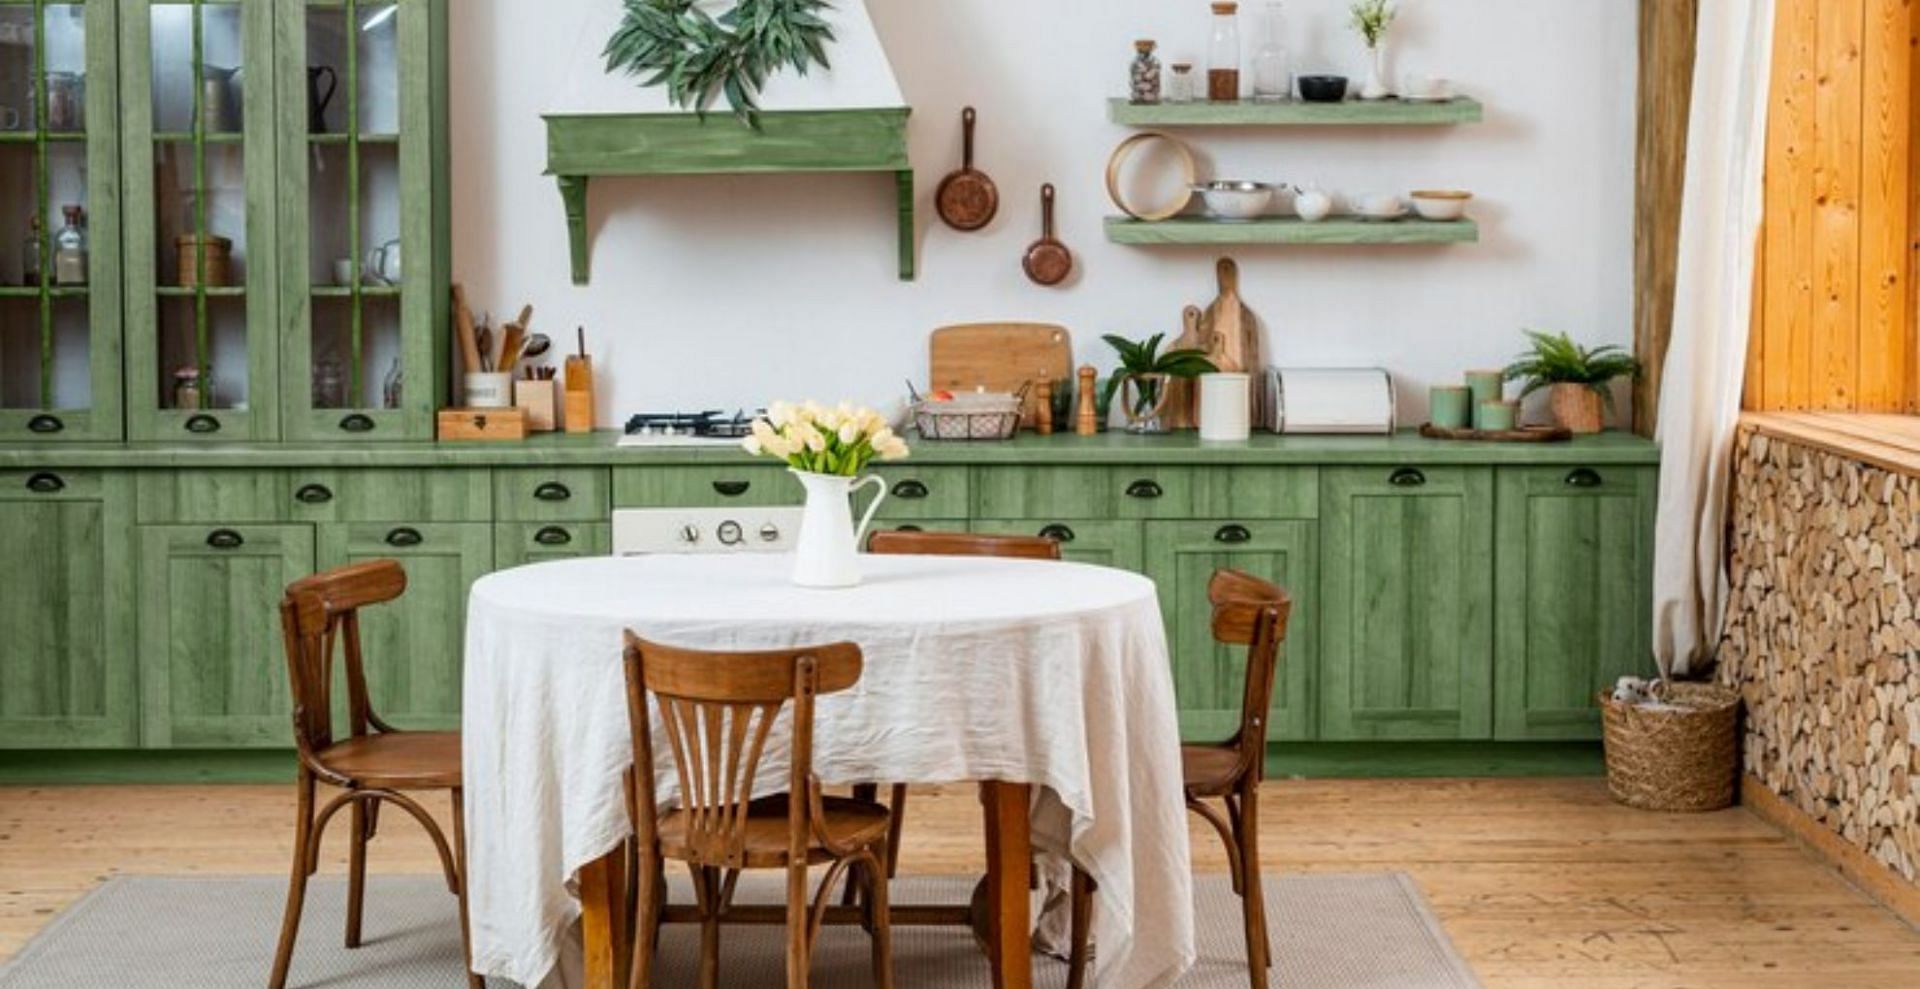 Boho-style kitchen decor ideas that you can use